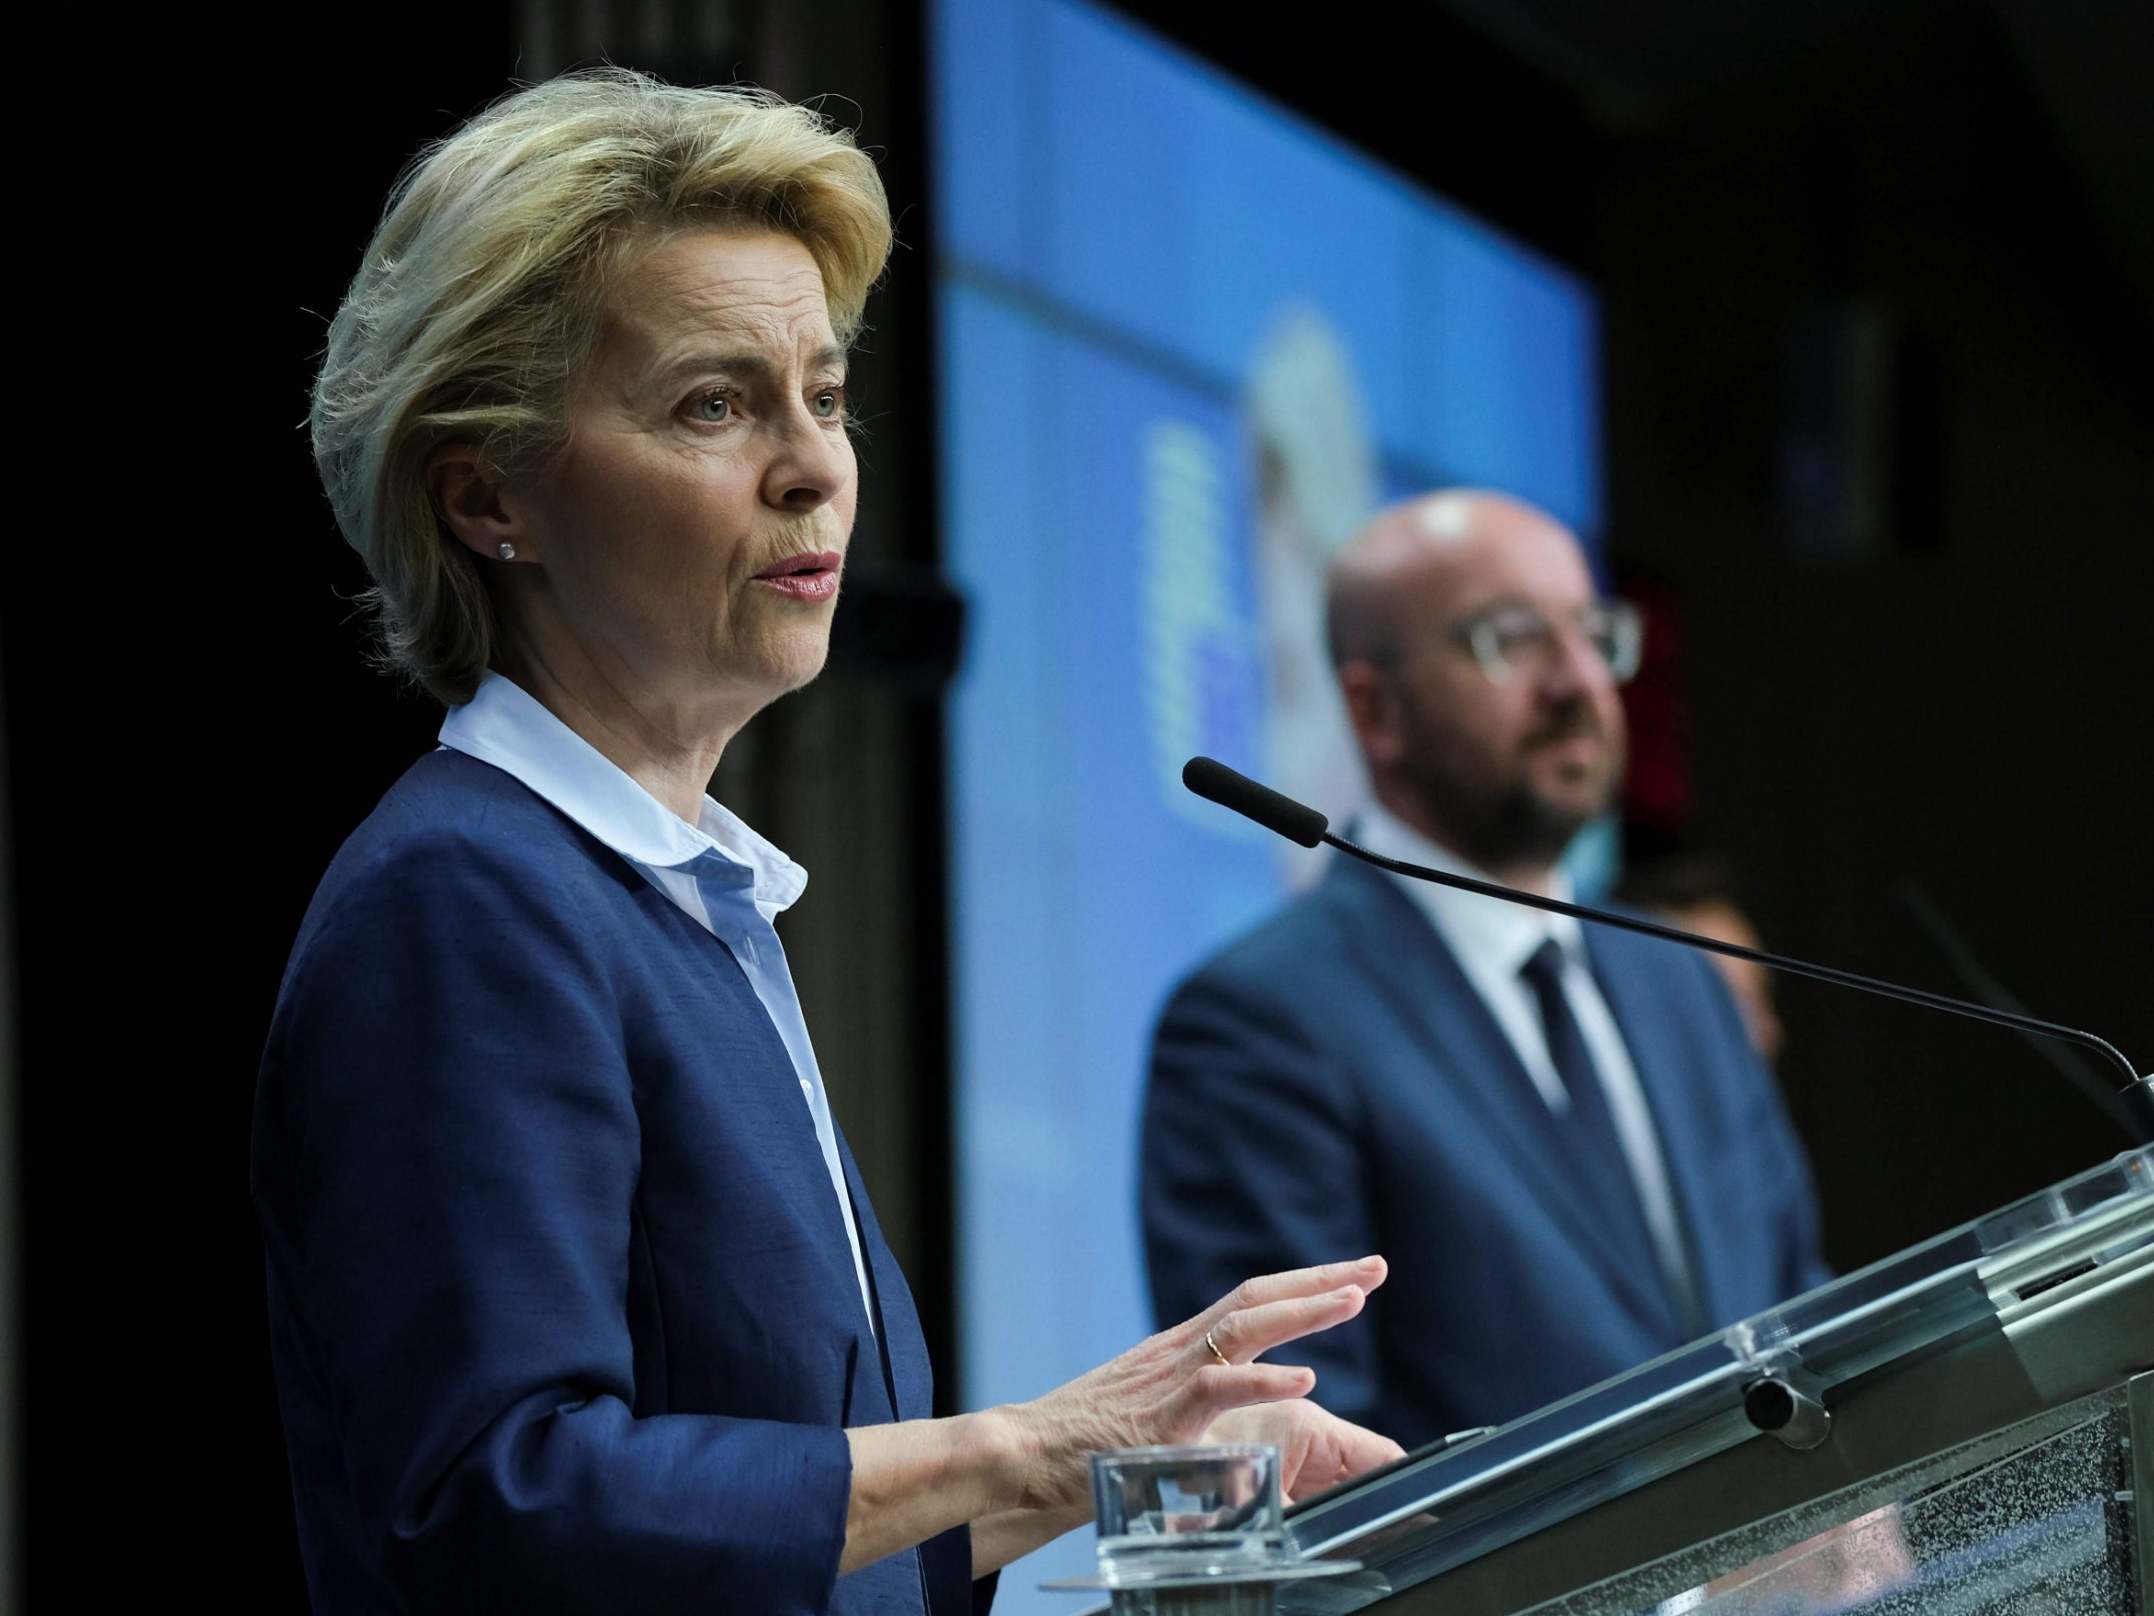 European Commission President Ursula Von Der Leyen and European Council President Charles Michel give a press conference following a video conferenced EU summit to discuss the measures to tackle the spread of the Covid-19 pandemic